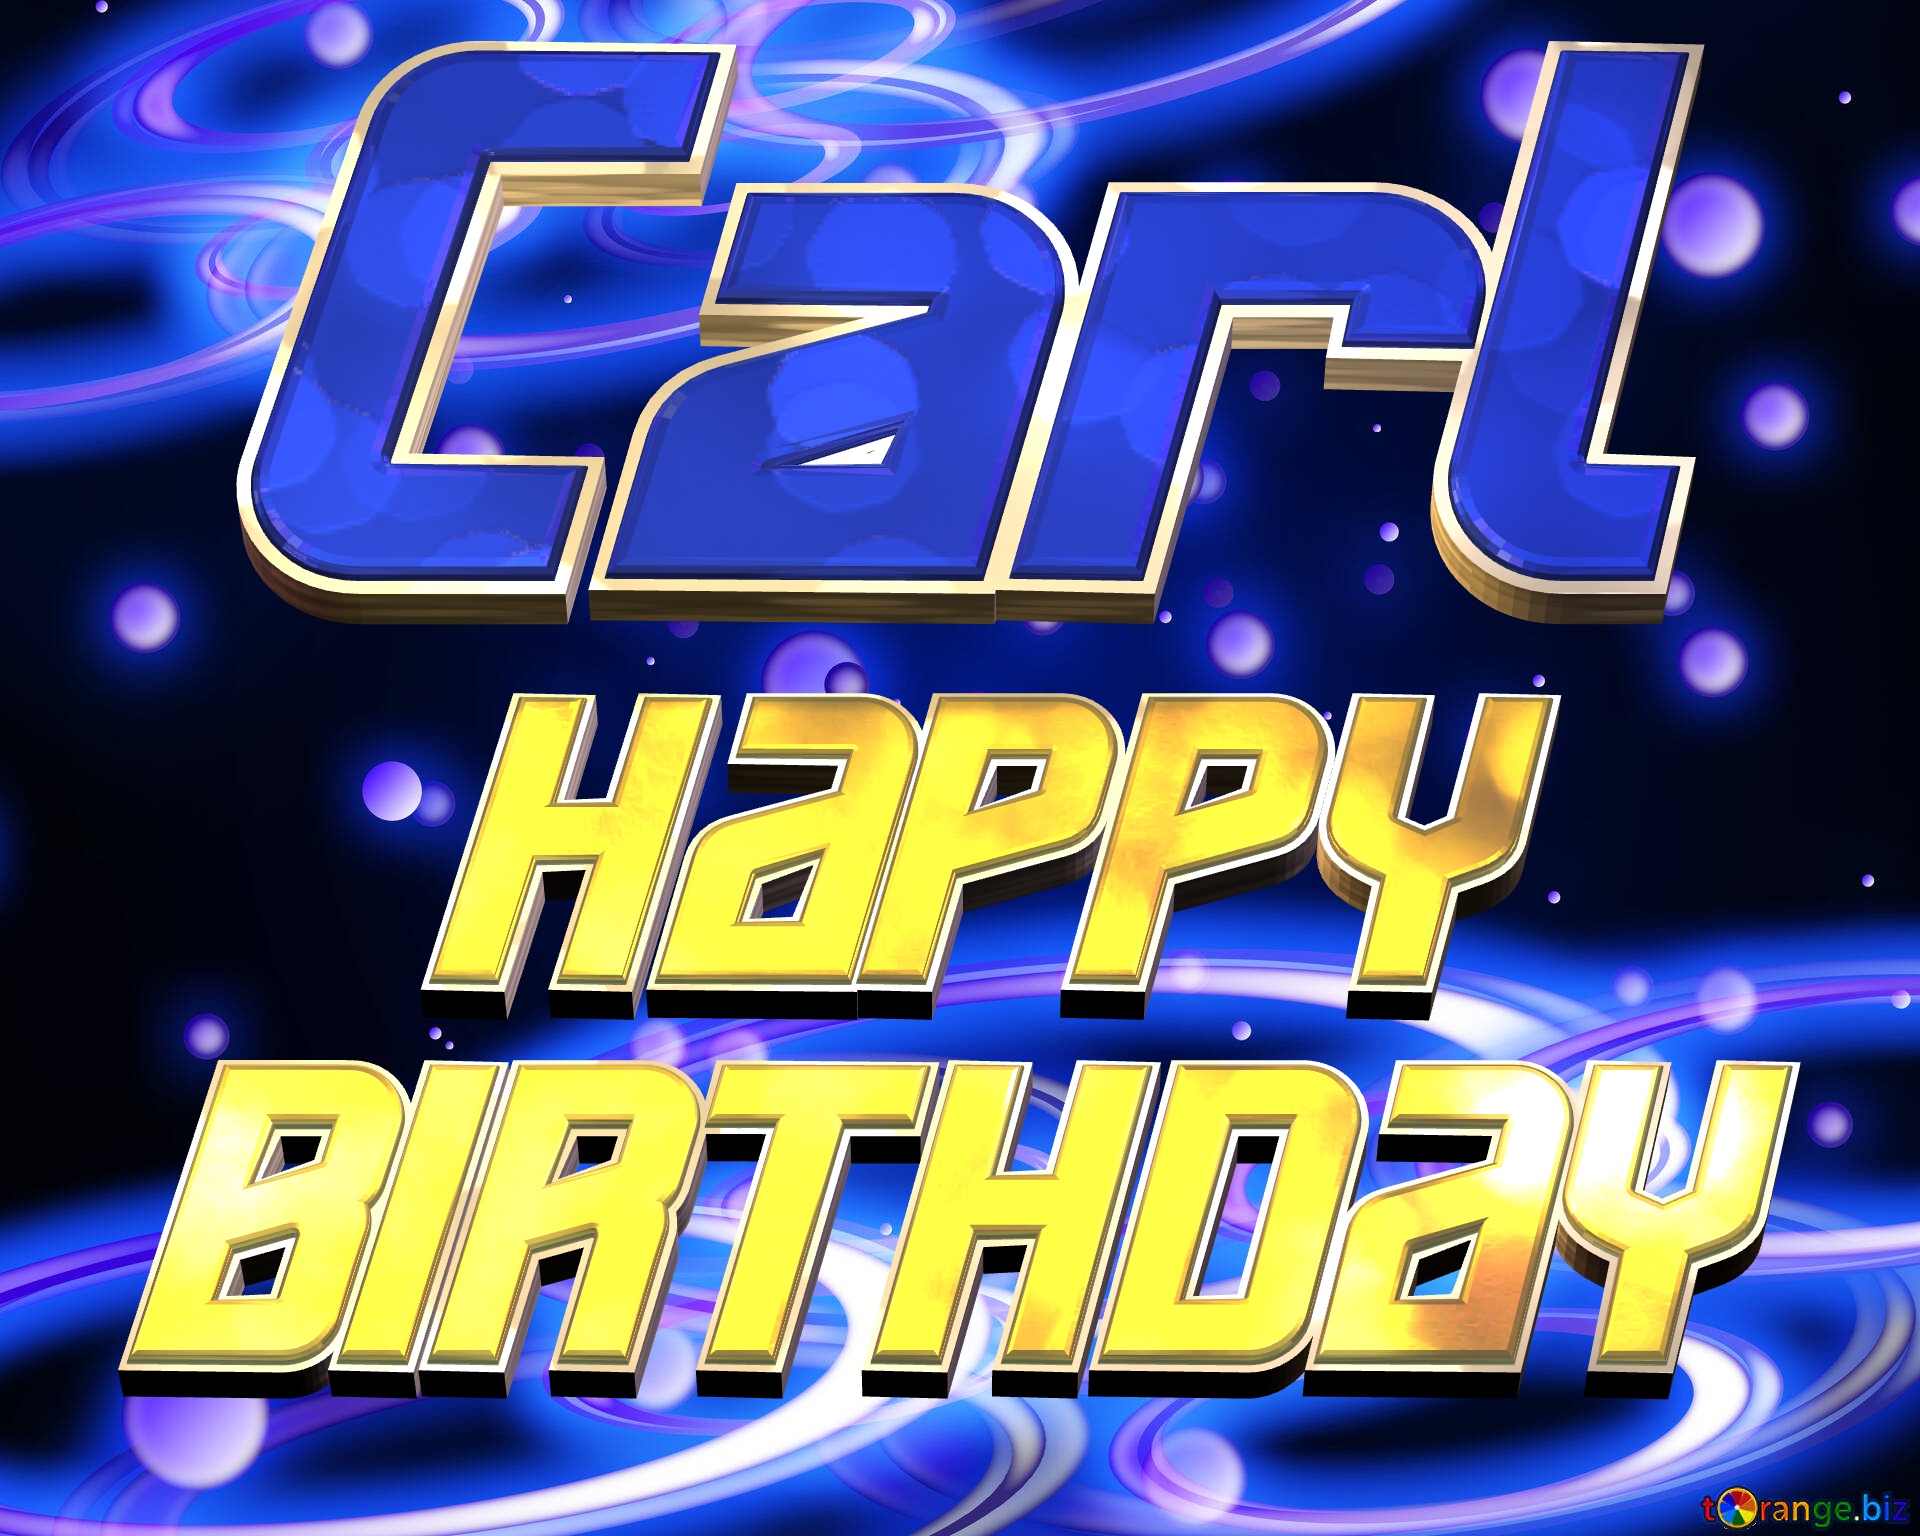 Carl Space Happy Birthday! Technology background №54919